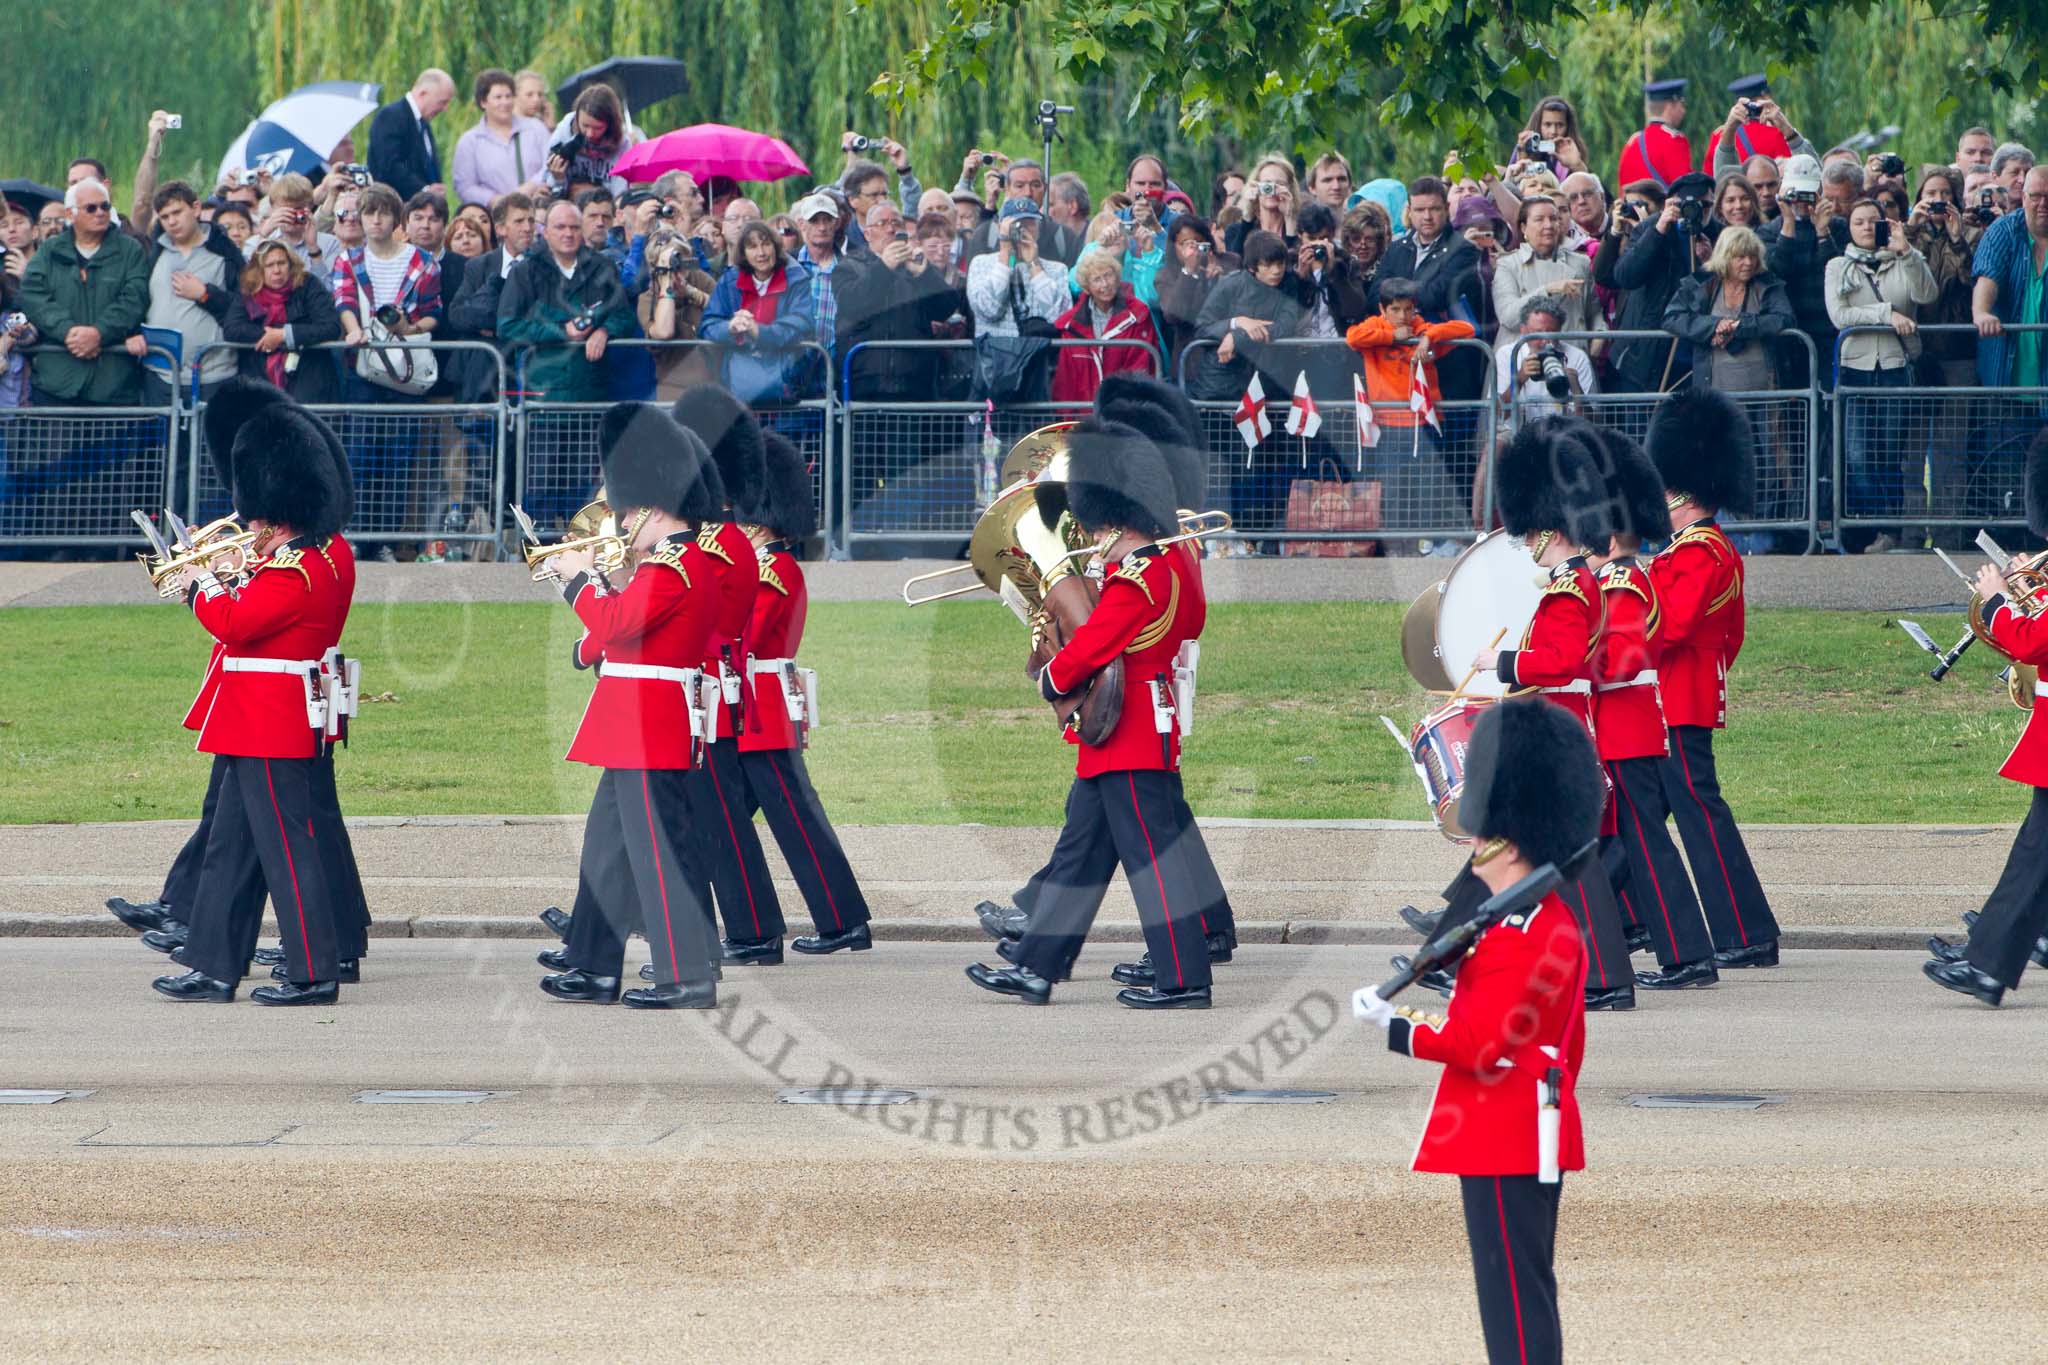 Trooping the Colour 2011: The Band of the Scots Guards, marching on Horse Guards Road, before turning onto Horse Guards Parade..
Horse Guards Parade, Westminster,
London SW1,
Greater London,
United Kingdom,
on 11 June 2011 at 10:30, image #47